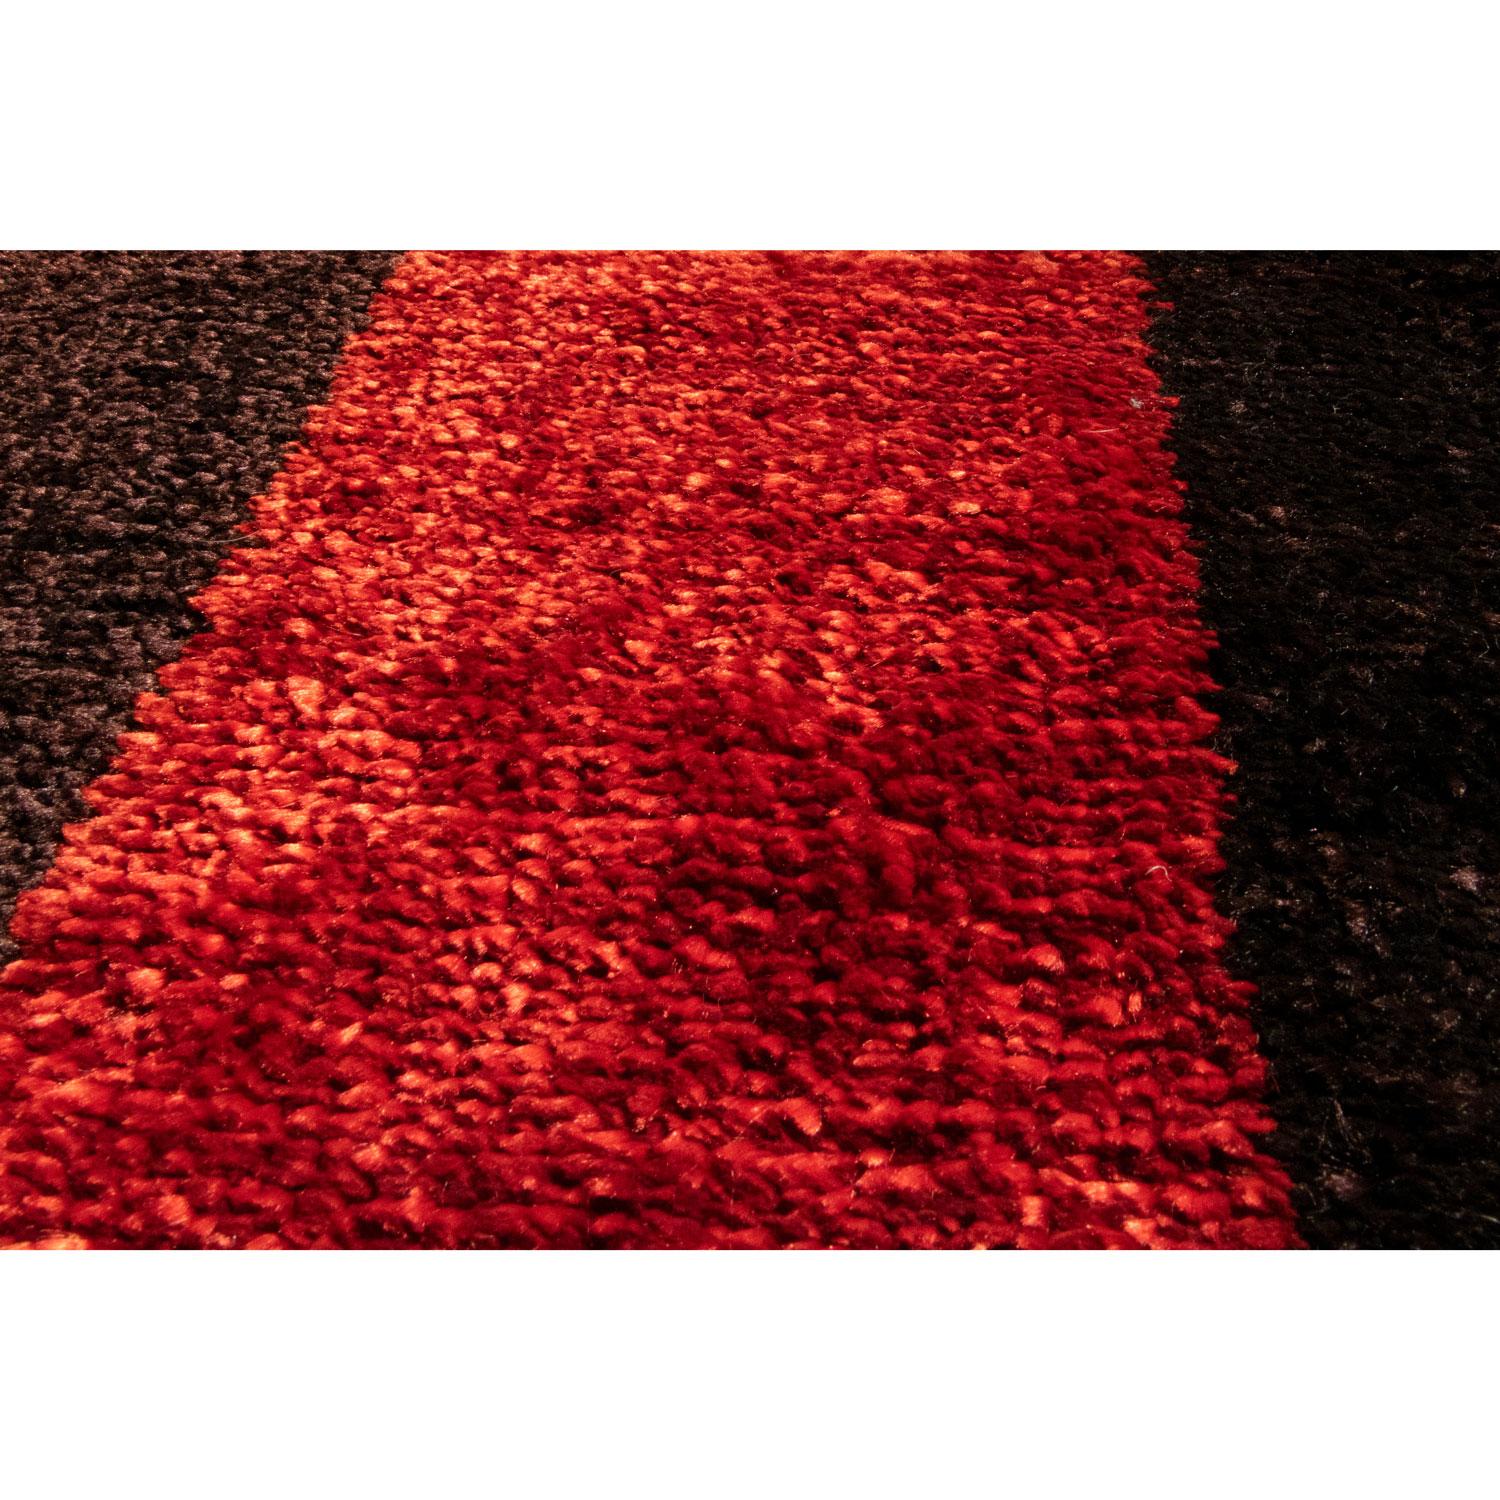 Indian Contemporary Luxury Shiny Red Brown Runner Rug by Deanna Comellini 70x240 cm For Sale